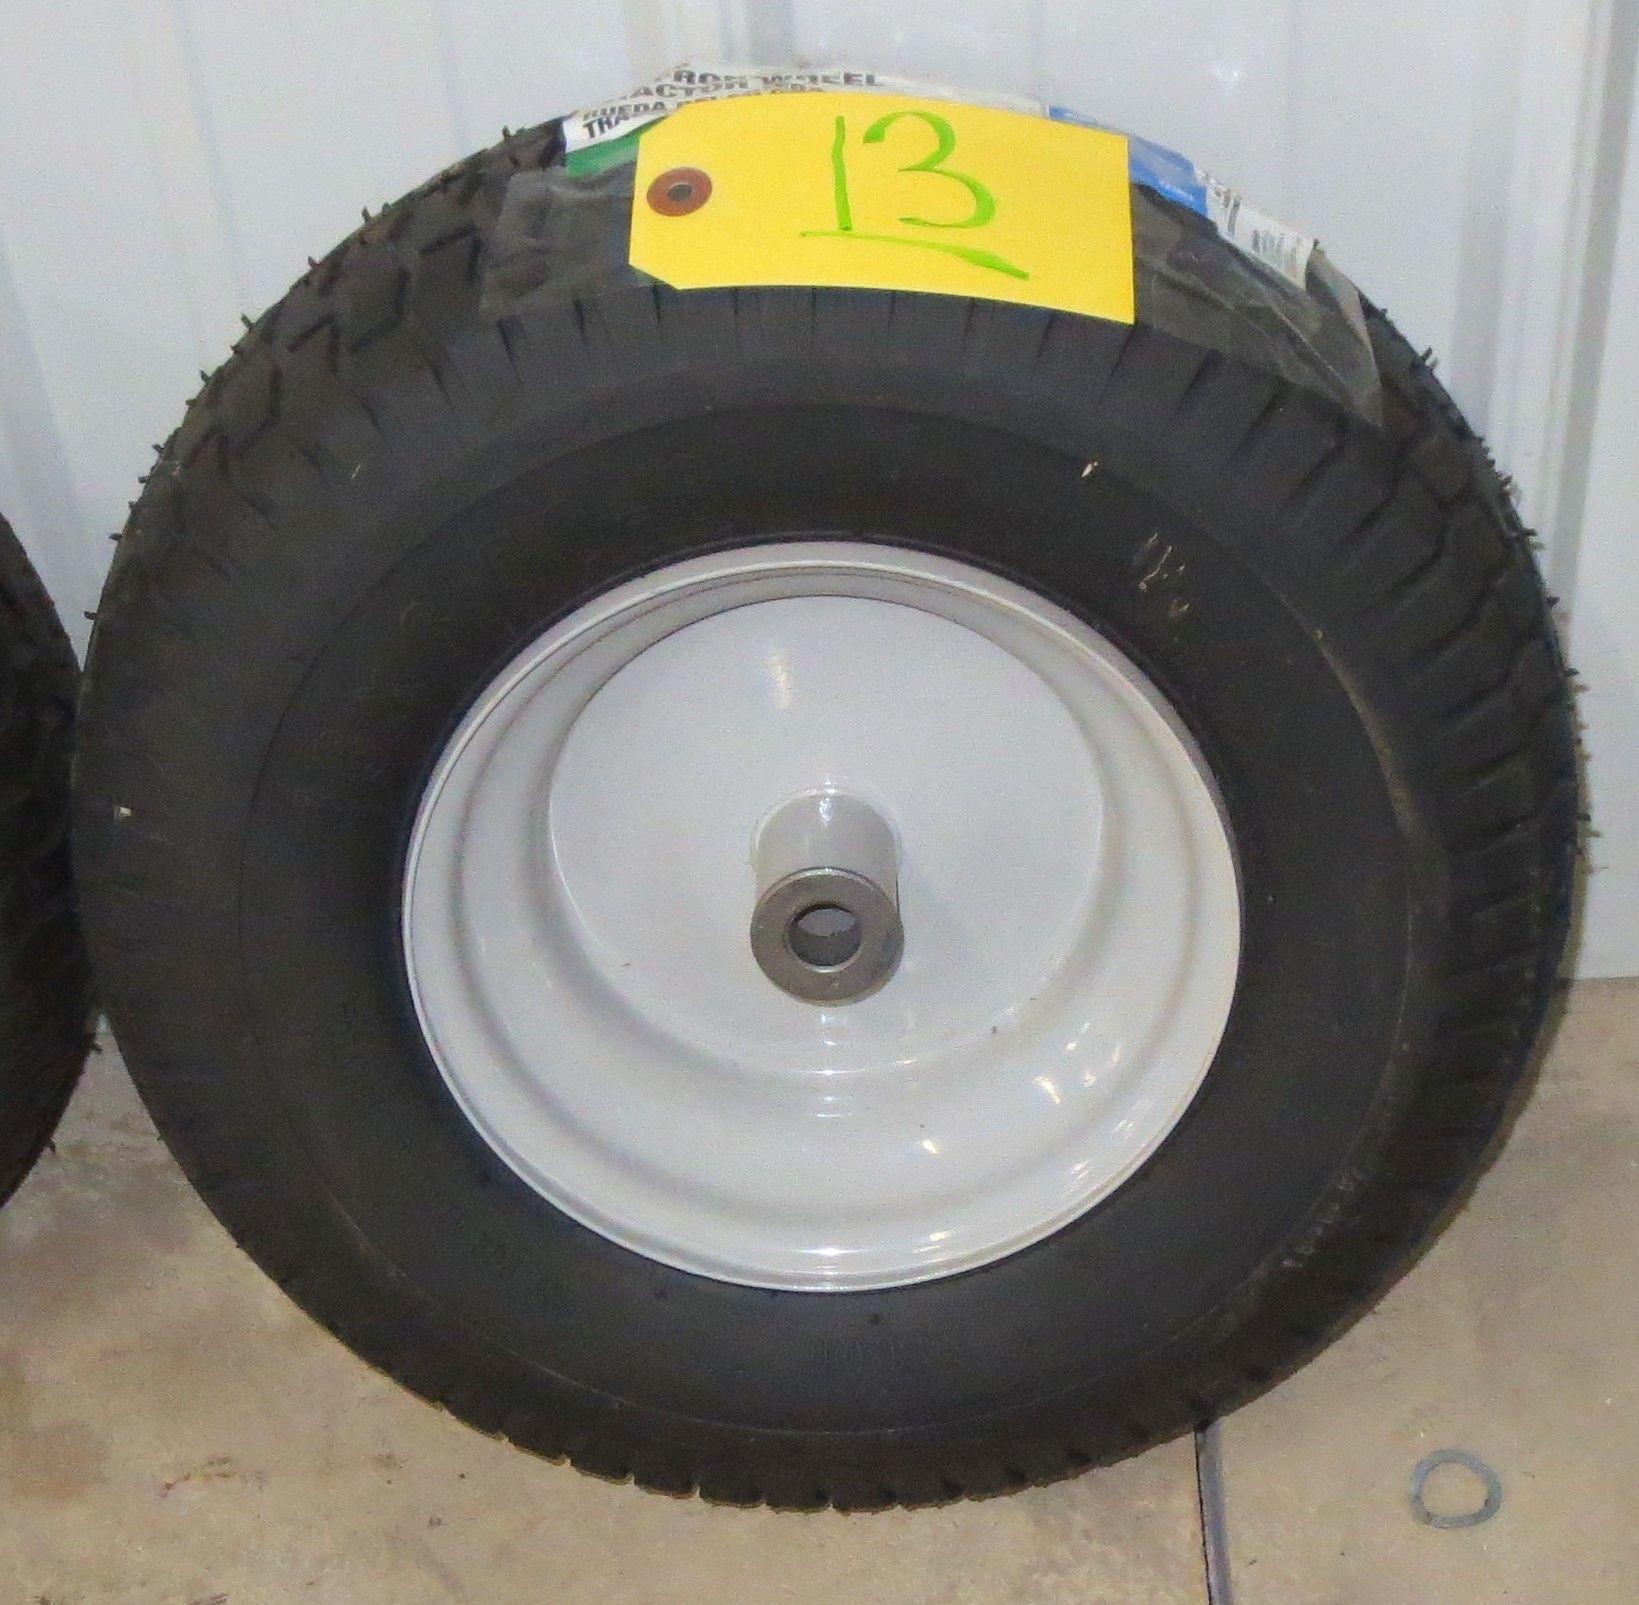 1 Tire and rim 16 inch front tractor tire 16 x 6.5